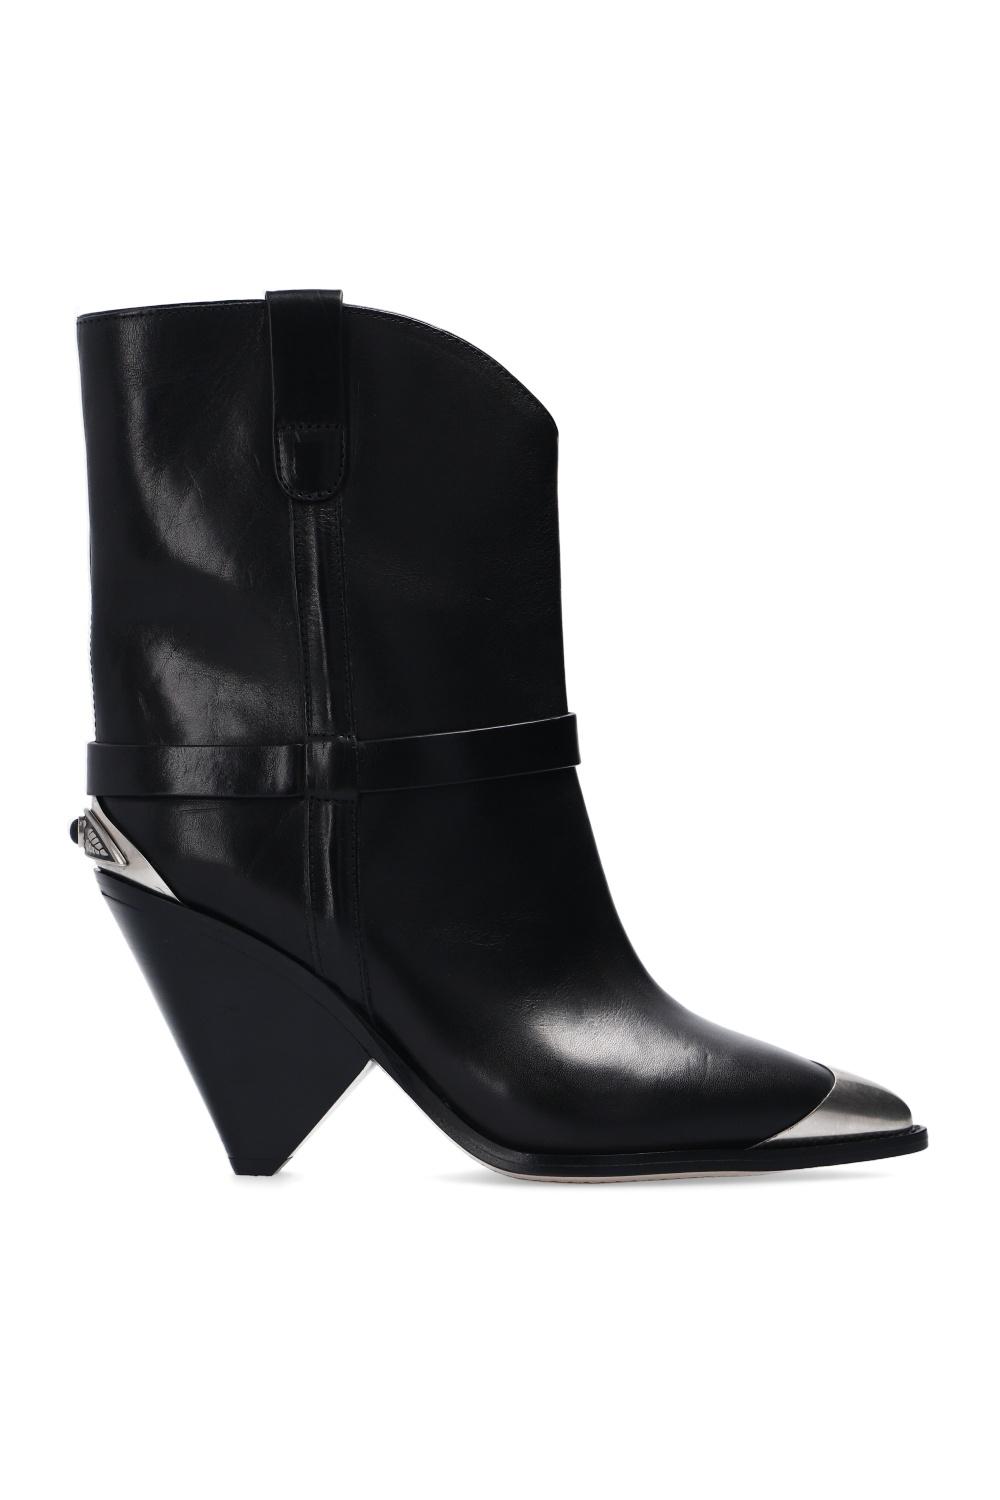 Isabel Marant Leather Lamsy Cone-heel Boots in Black - Save 54% - Lyst